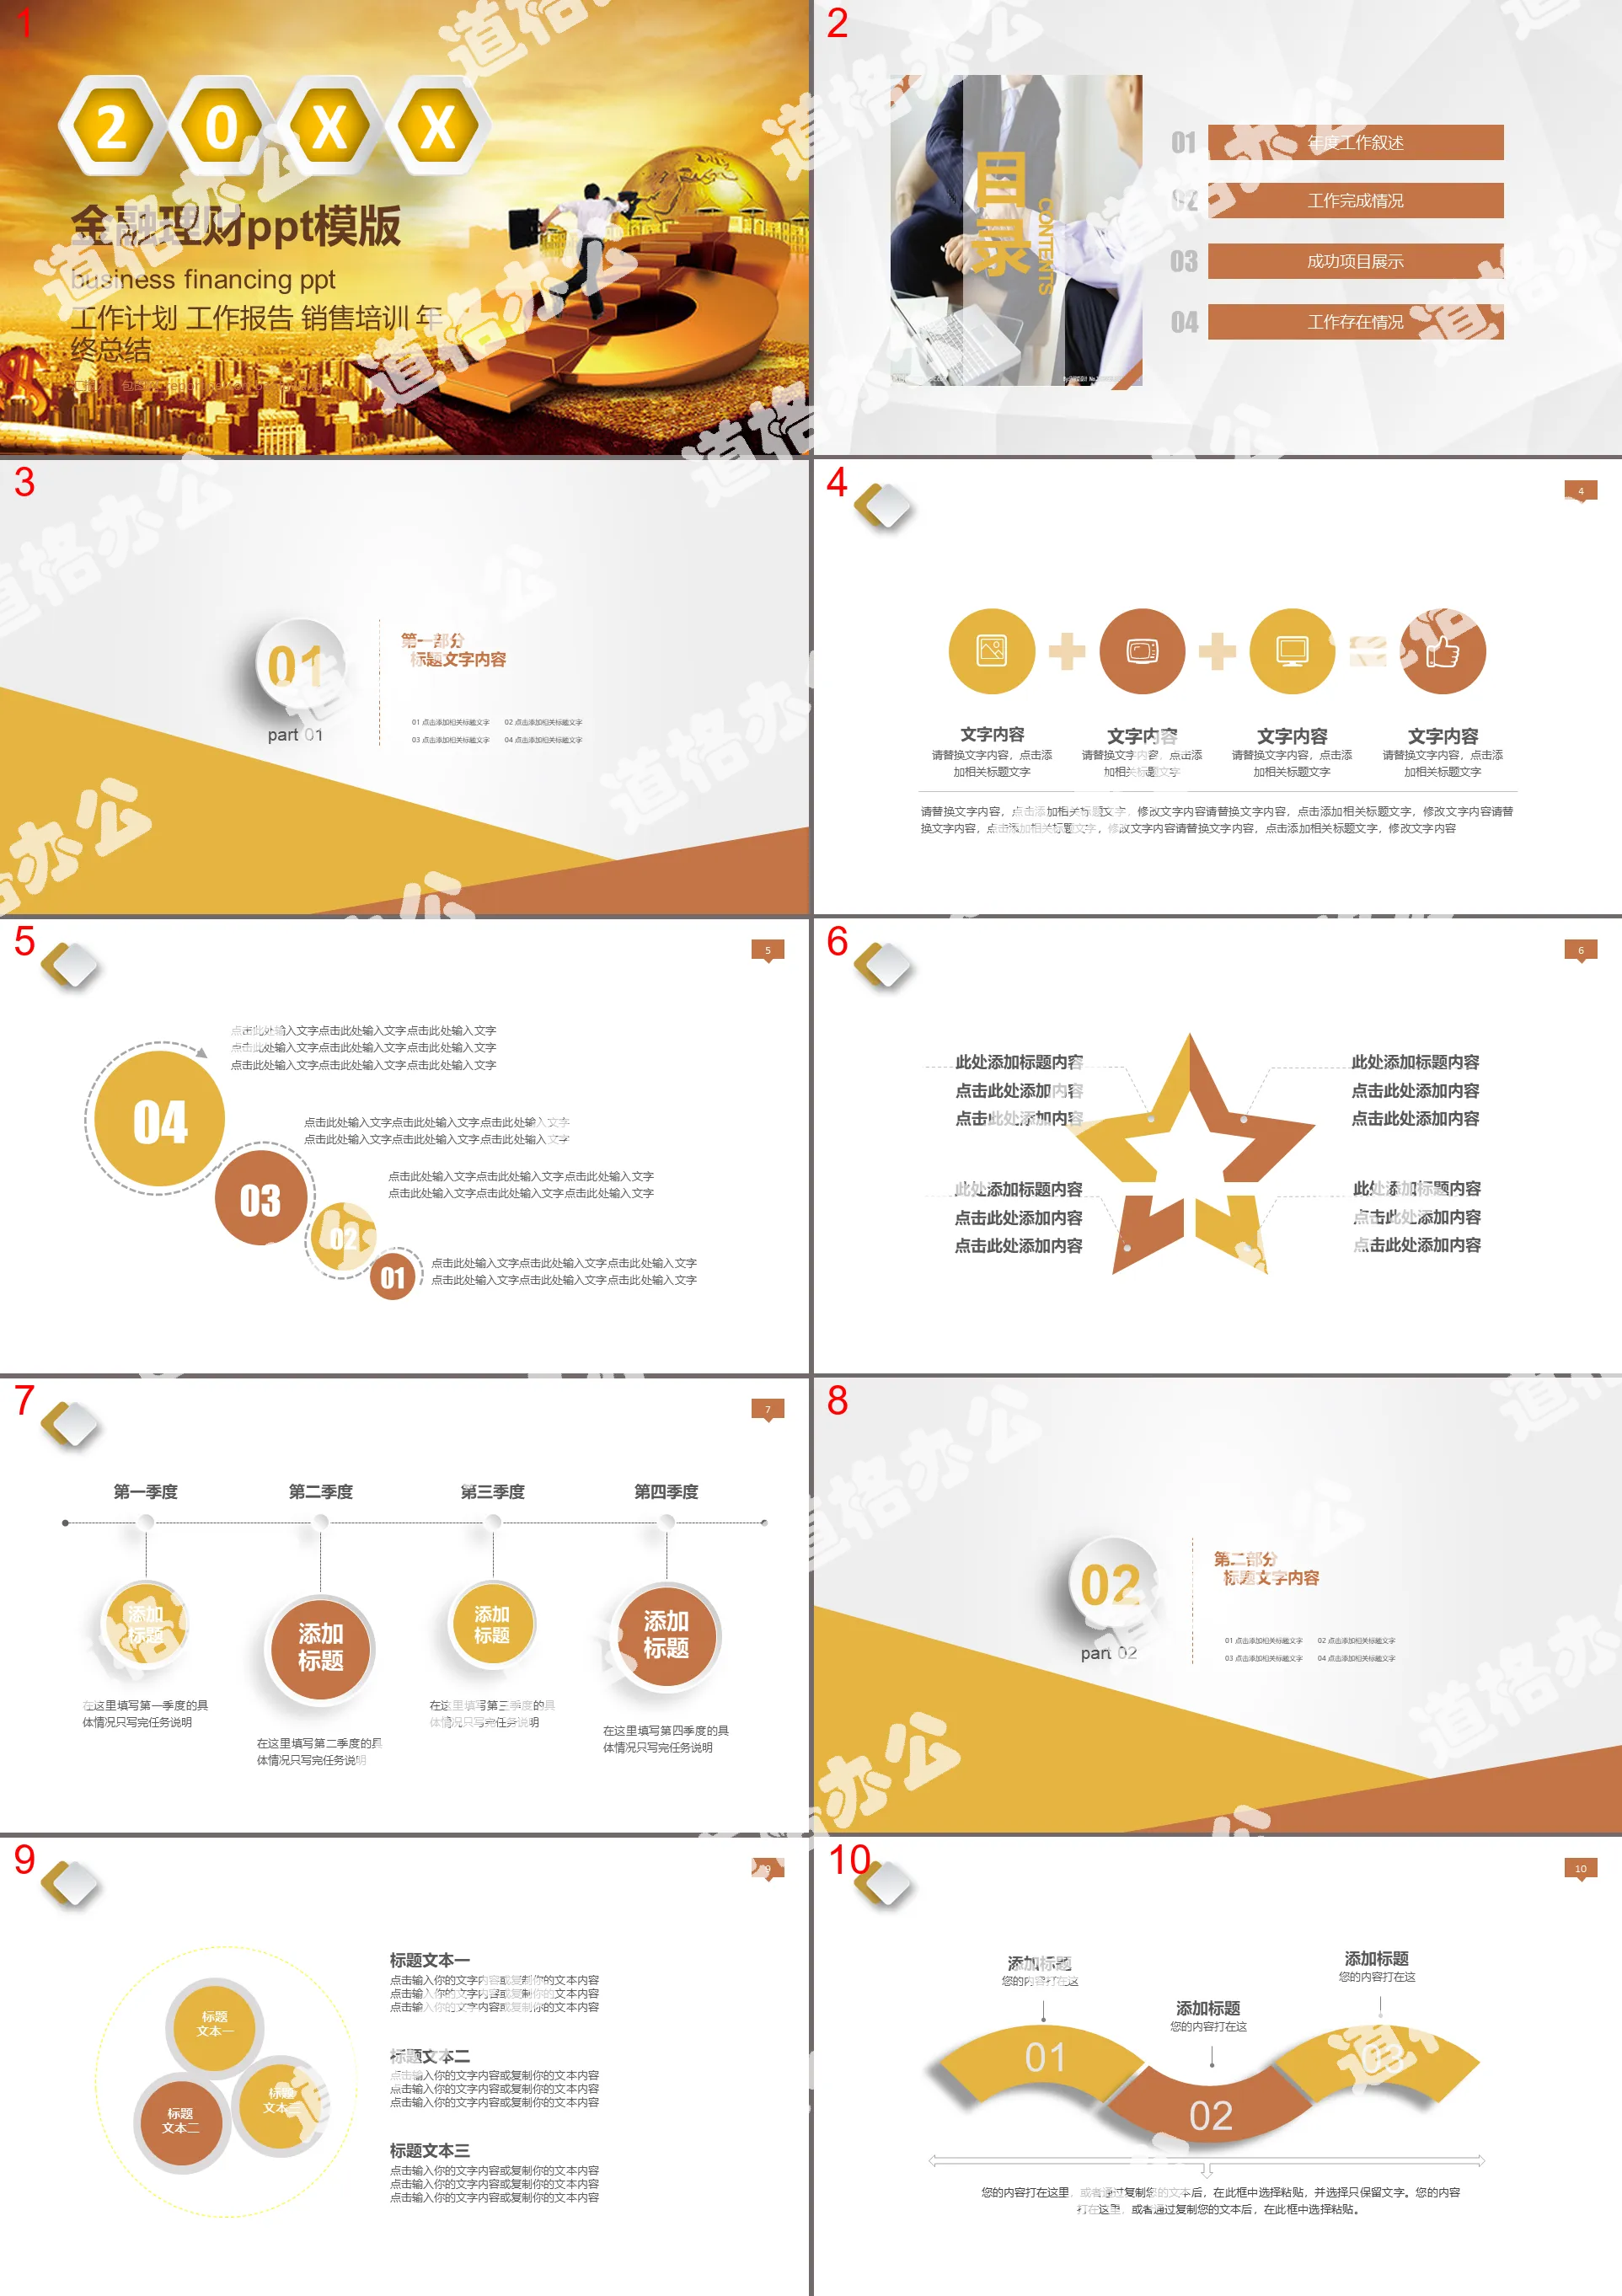 Golden financial investment and wealth management PPT template